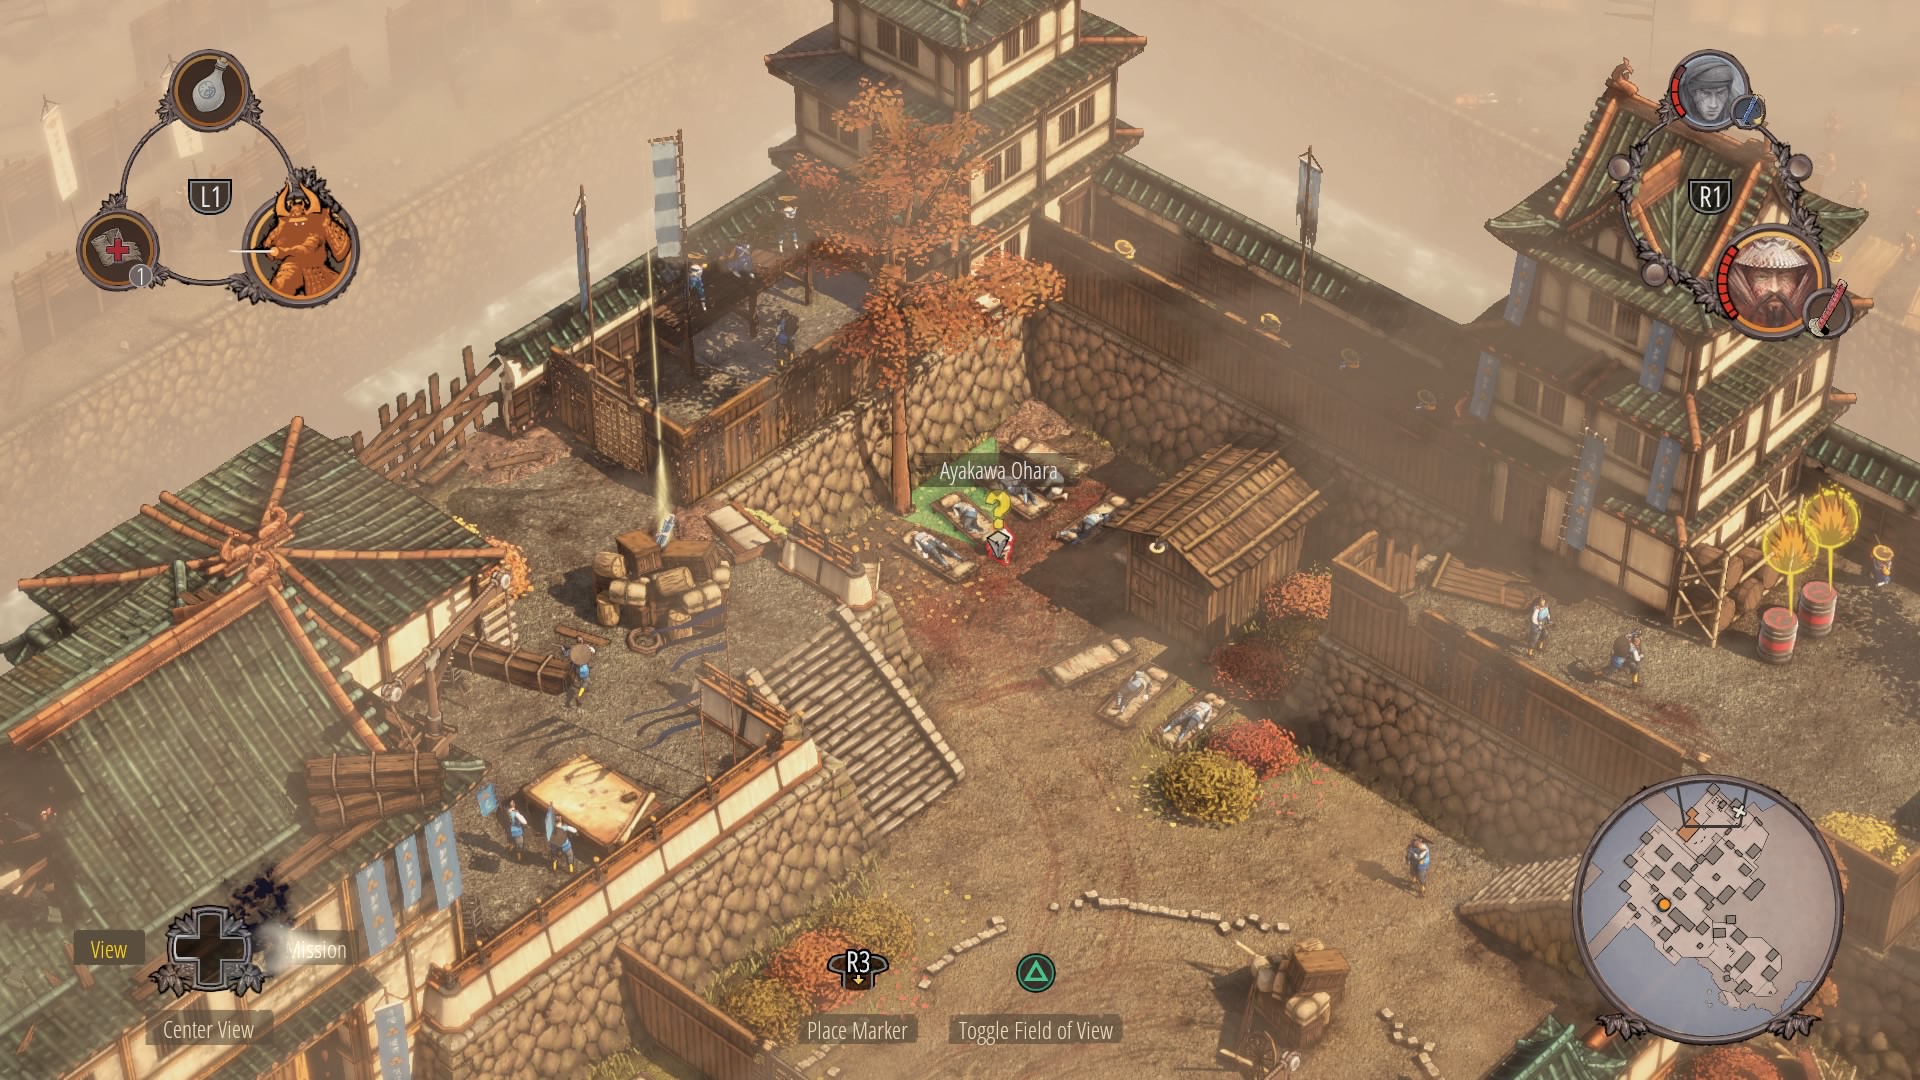 free download games like shadow tactics